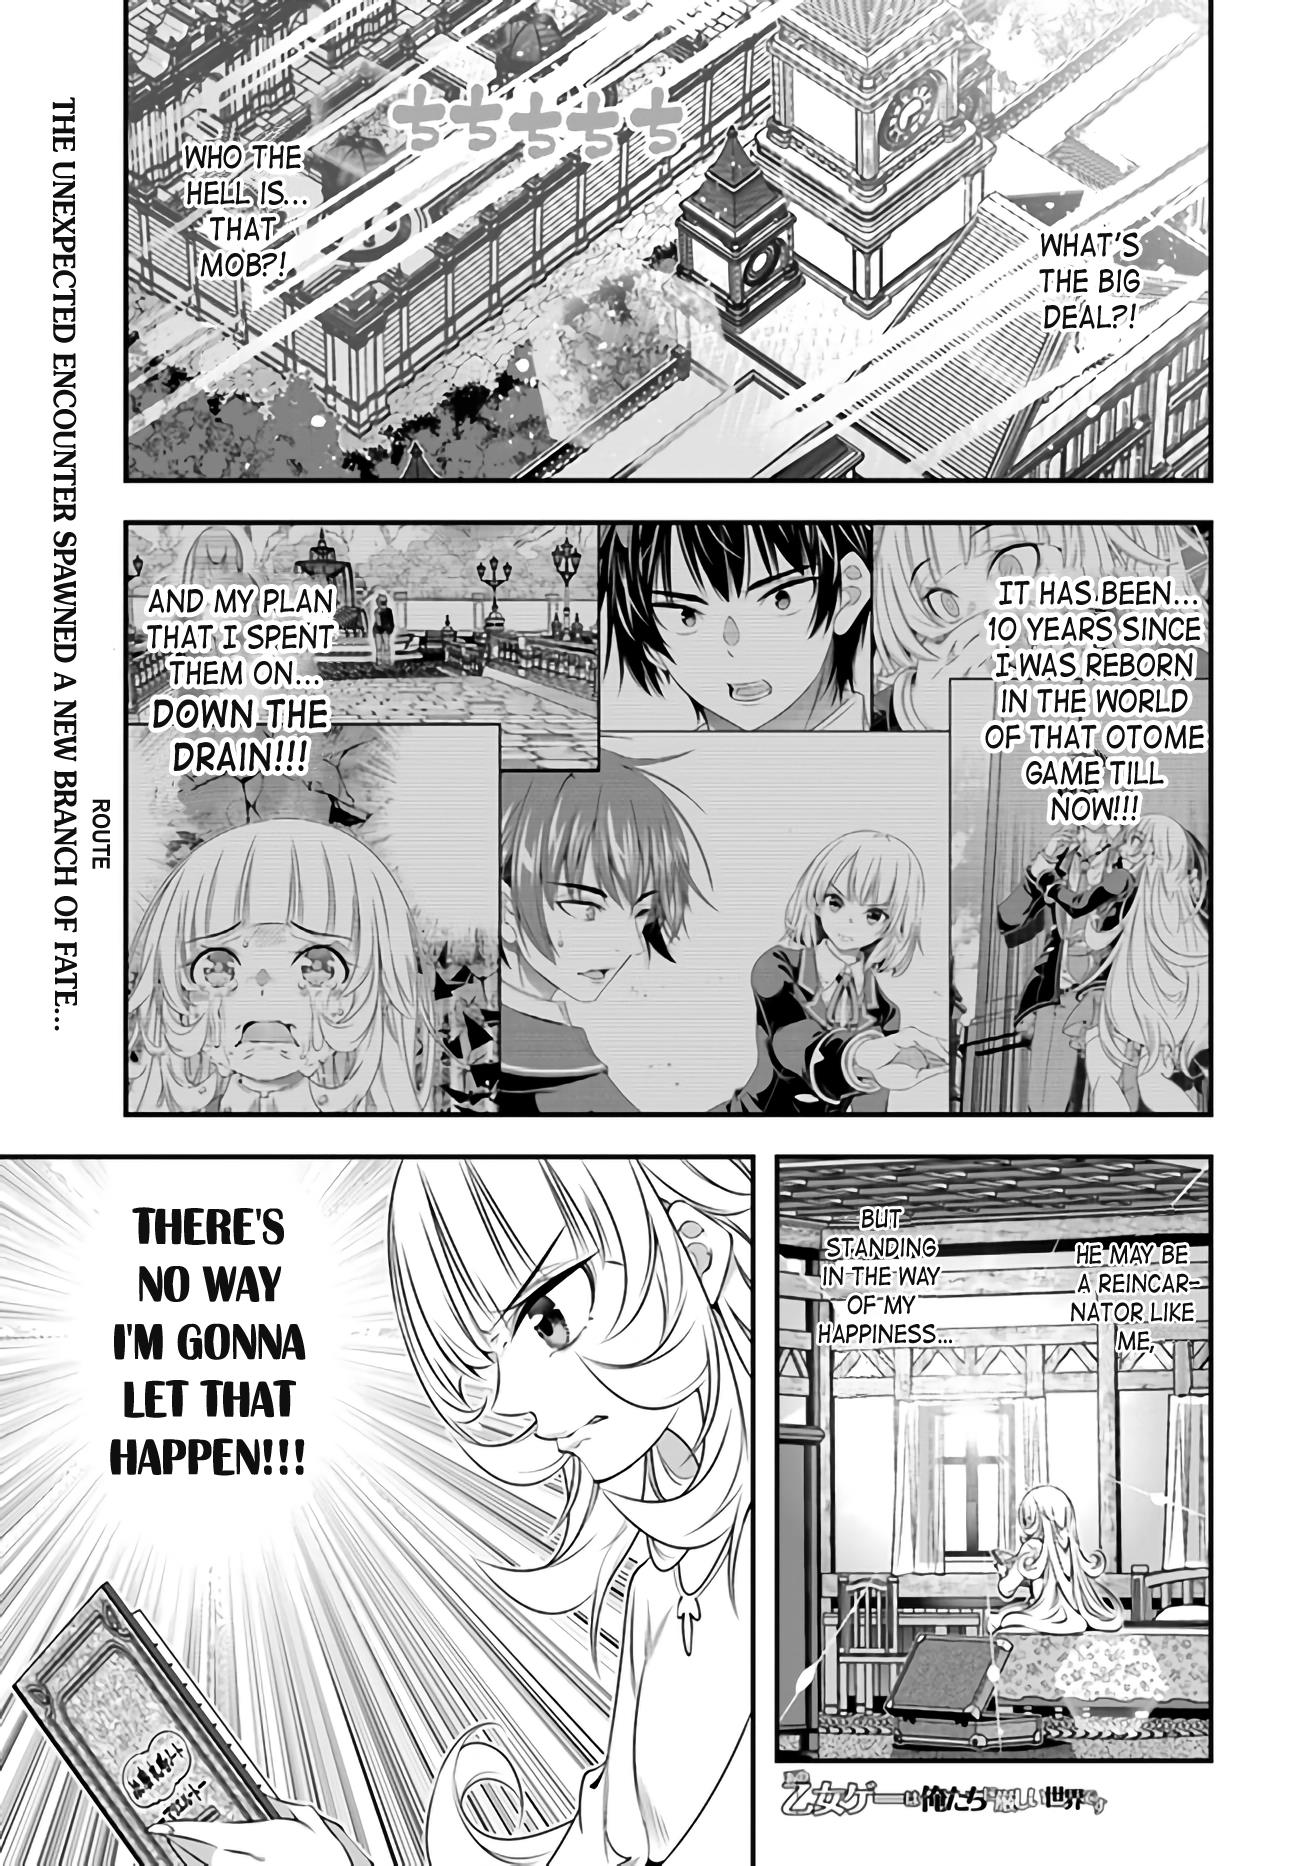 The World Of That Otome Game Is Tough For Us - Page 1